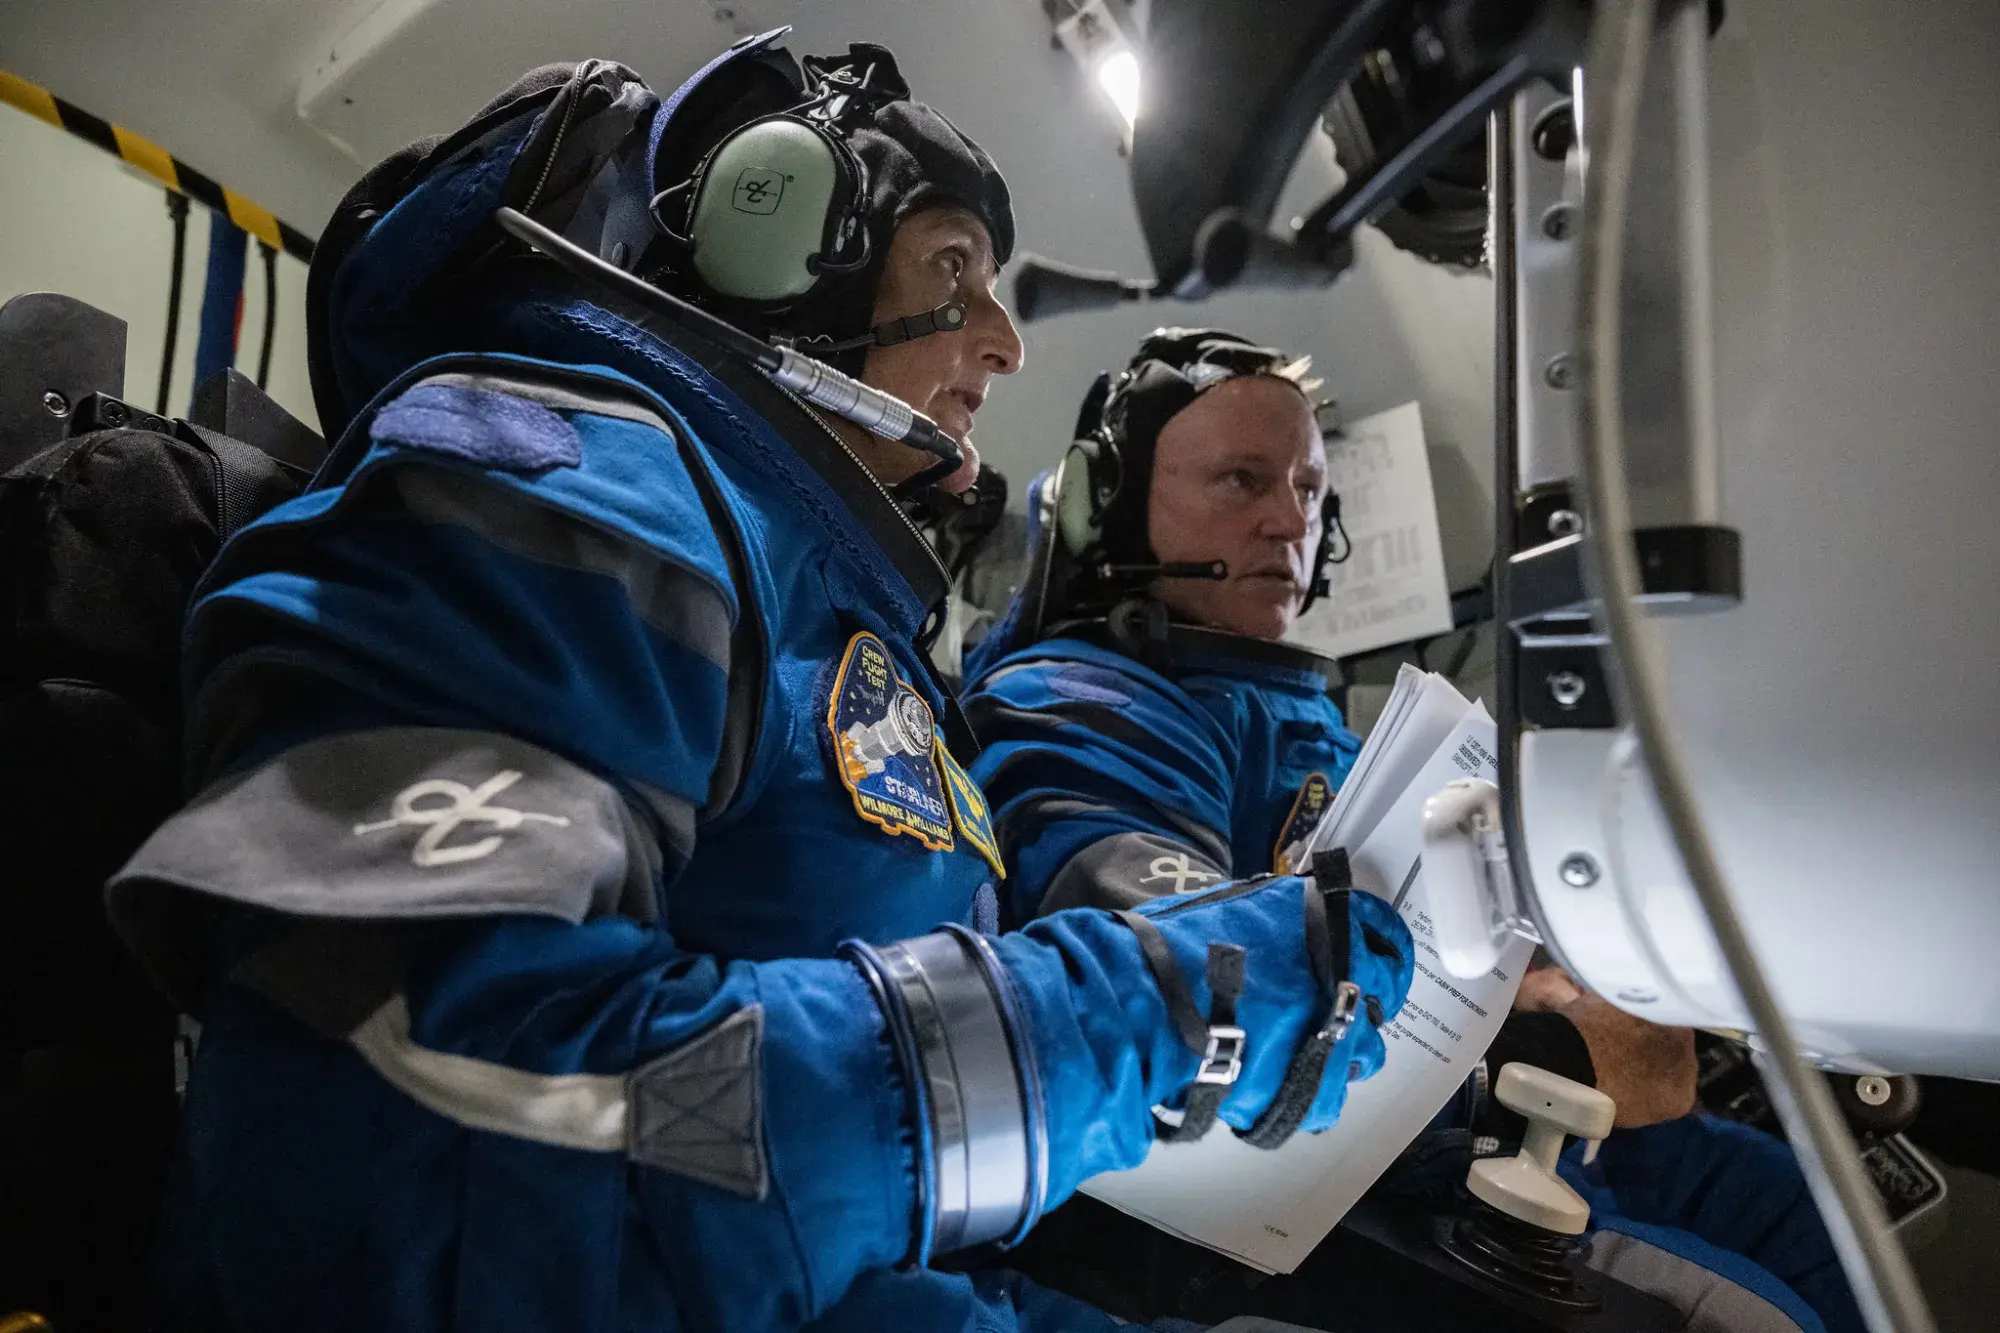 NASA’s Boeing Crew Flight Test Astronauts Butch Wilmore and Suni Williams prepare for their mission in the company’s Starliner spacecraft simulator at the agency’s Johnson Space Center in Houston. credit: NASA/Robert Markowitz